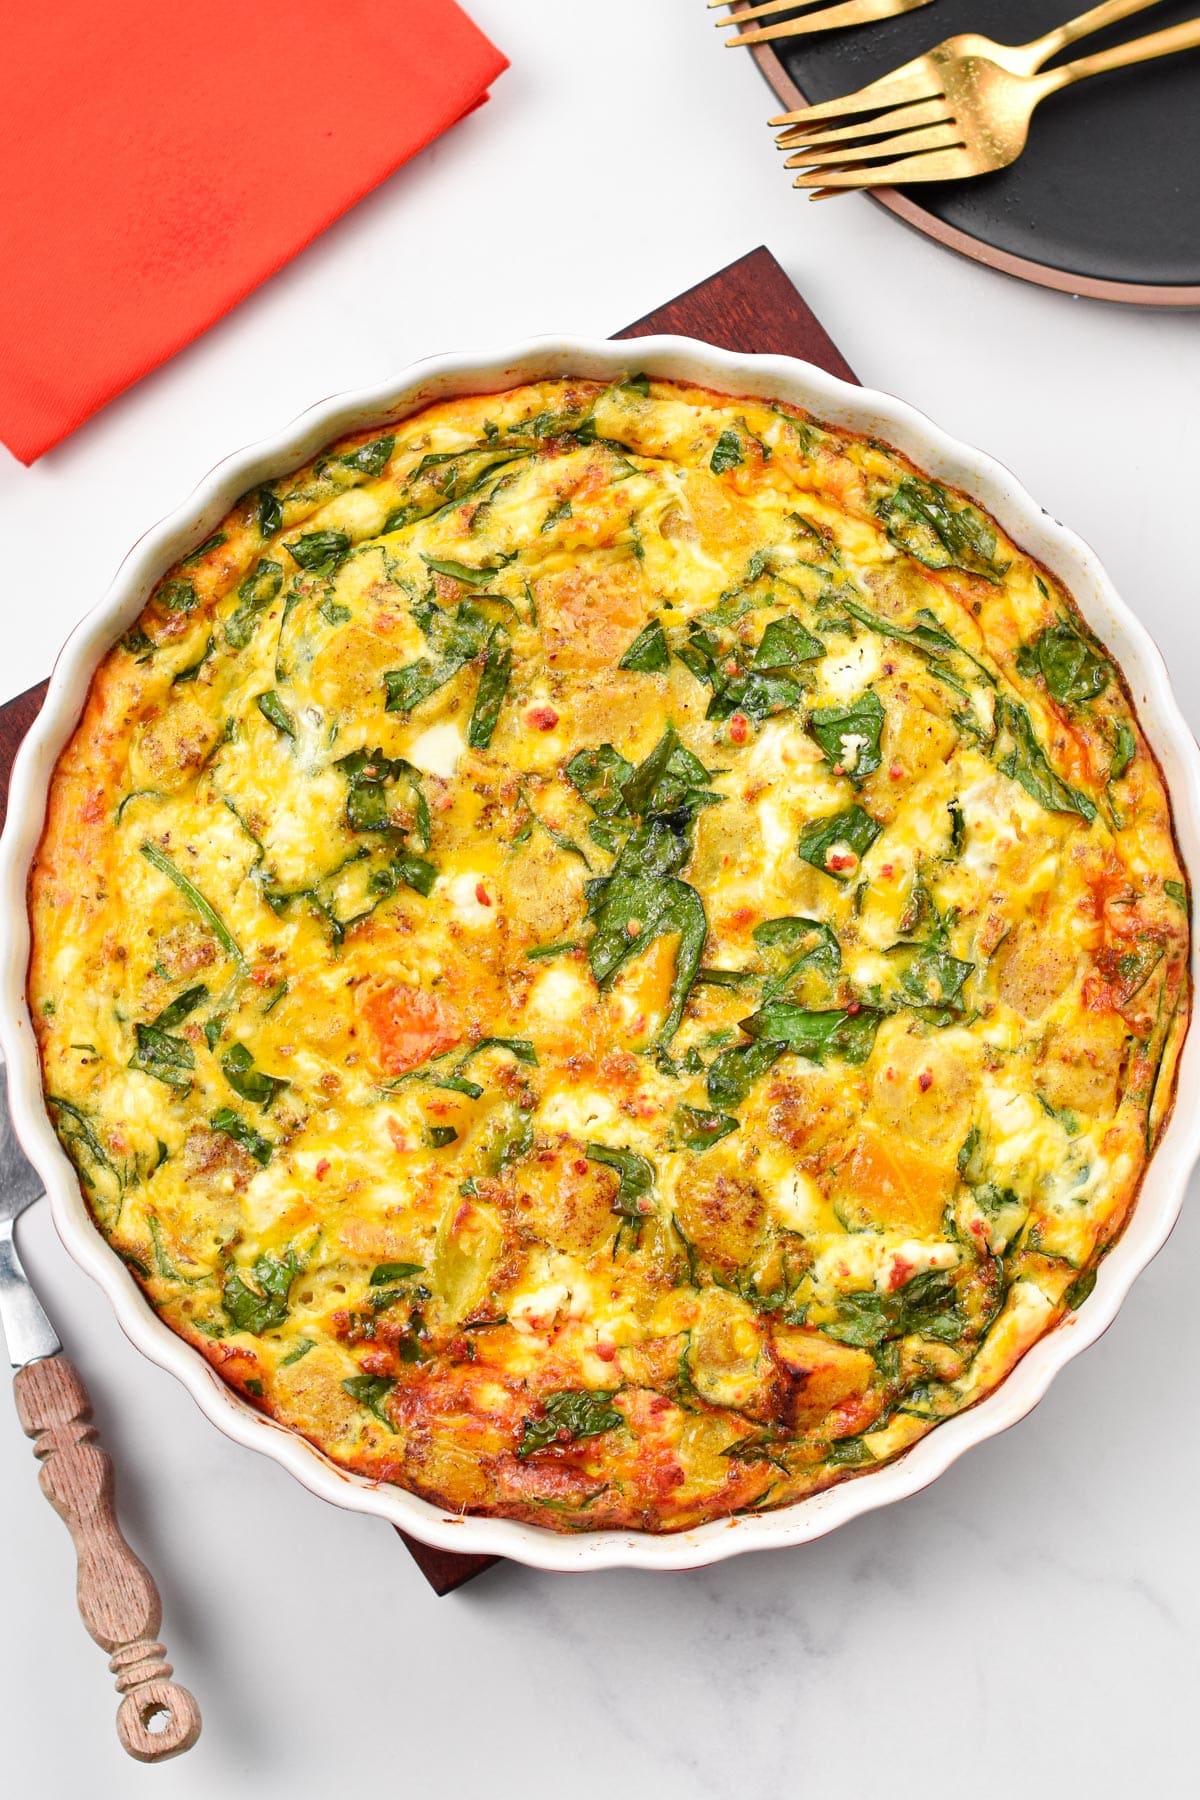 A roasted pumpkin spinach frittata in a ceramic pan, pictured from the top.